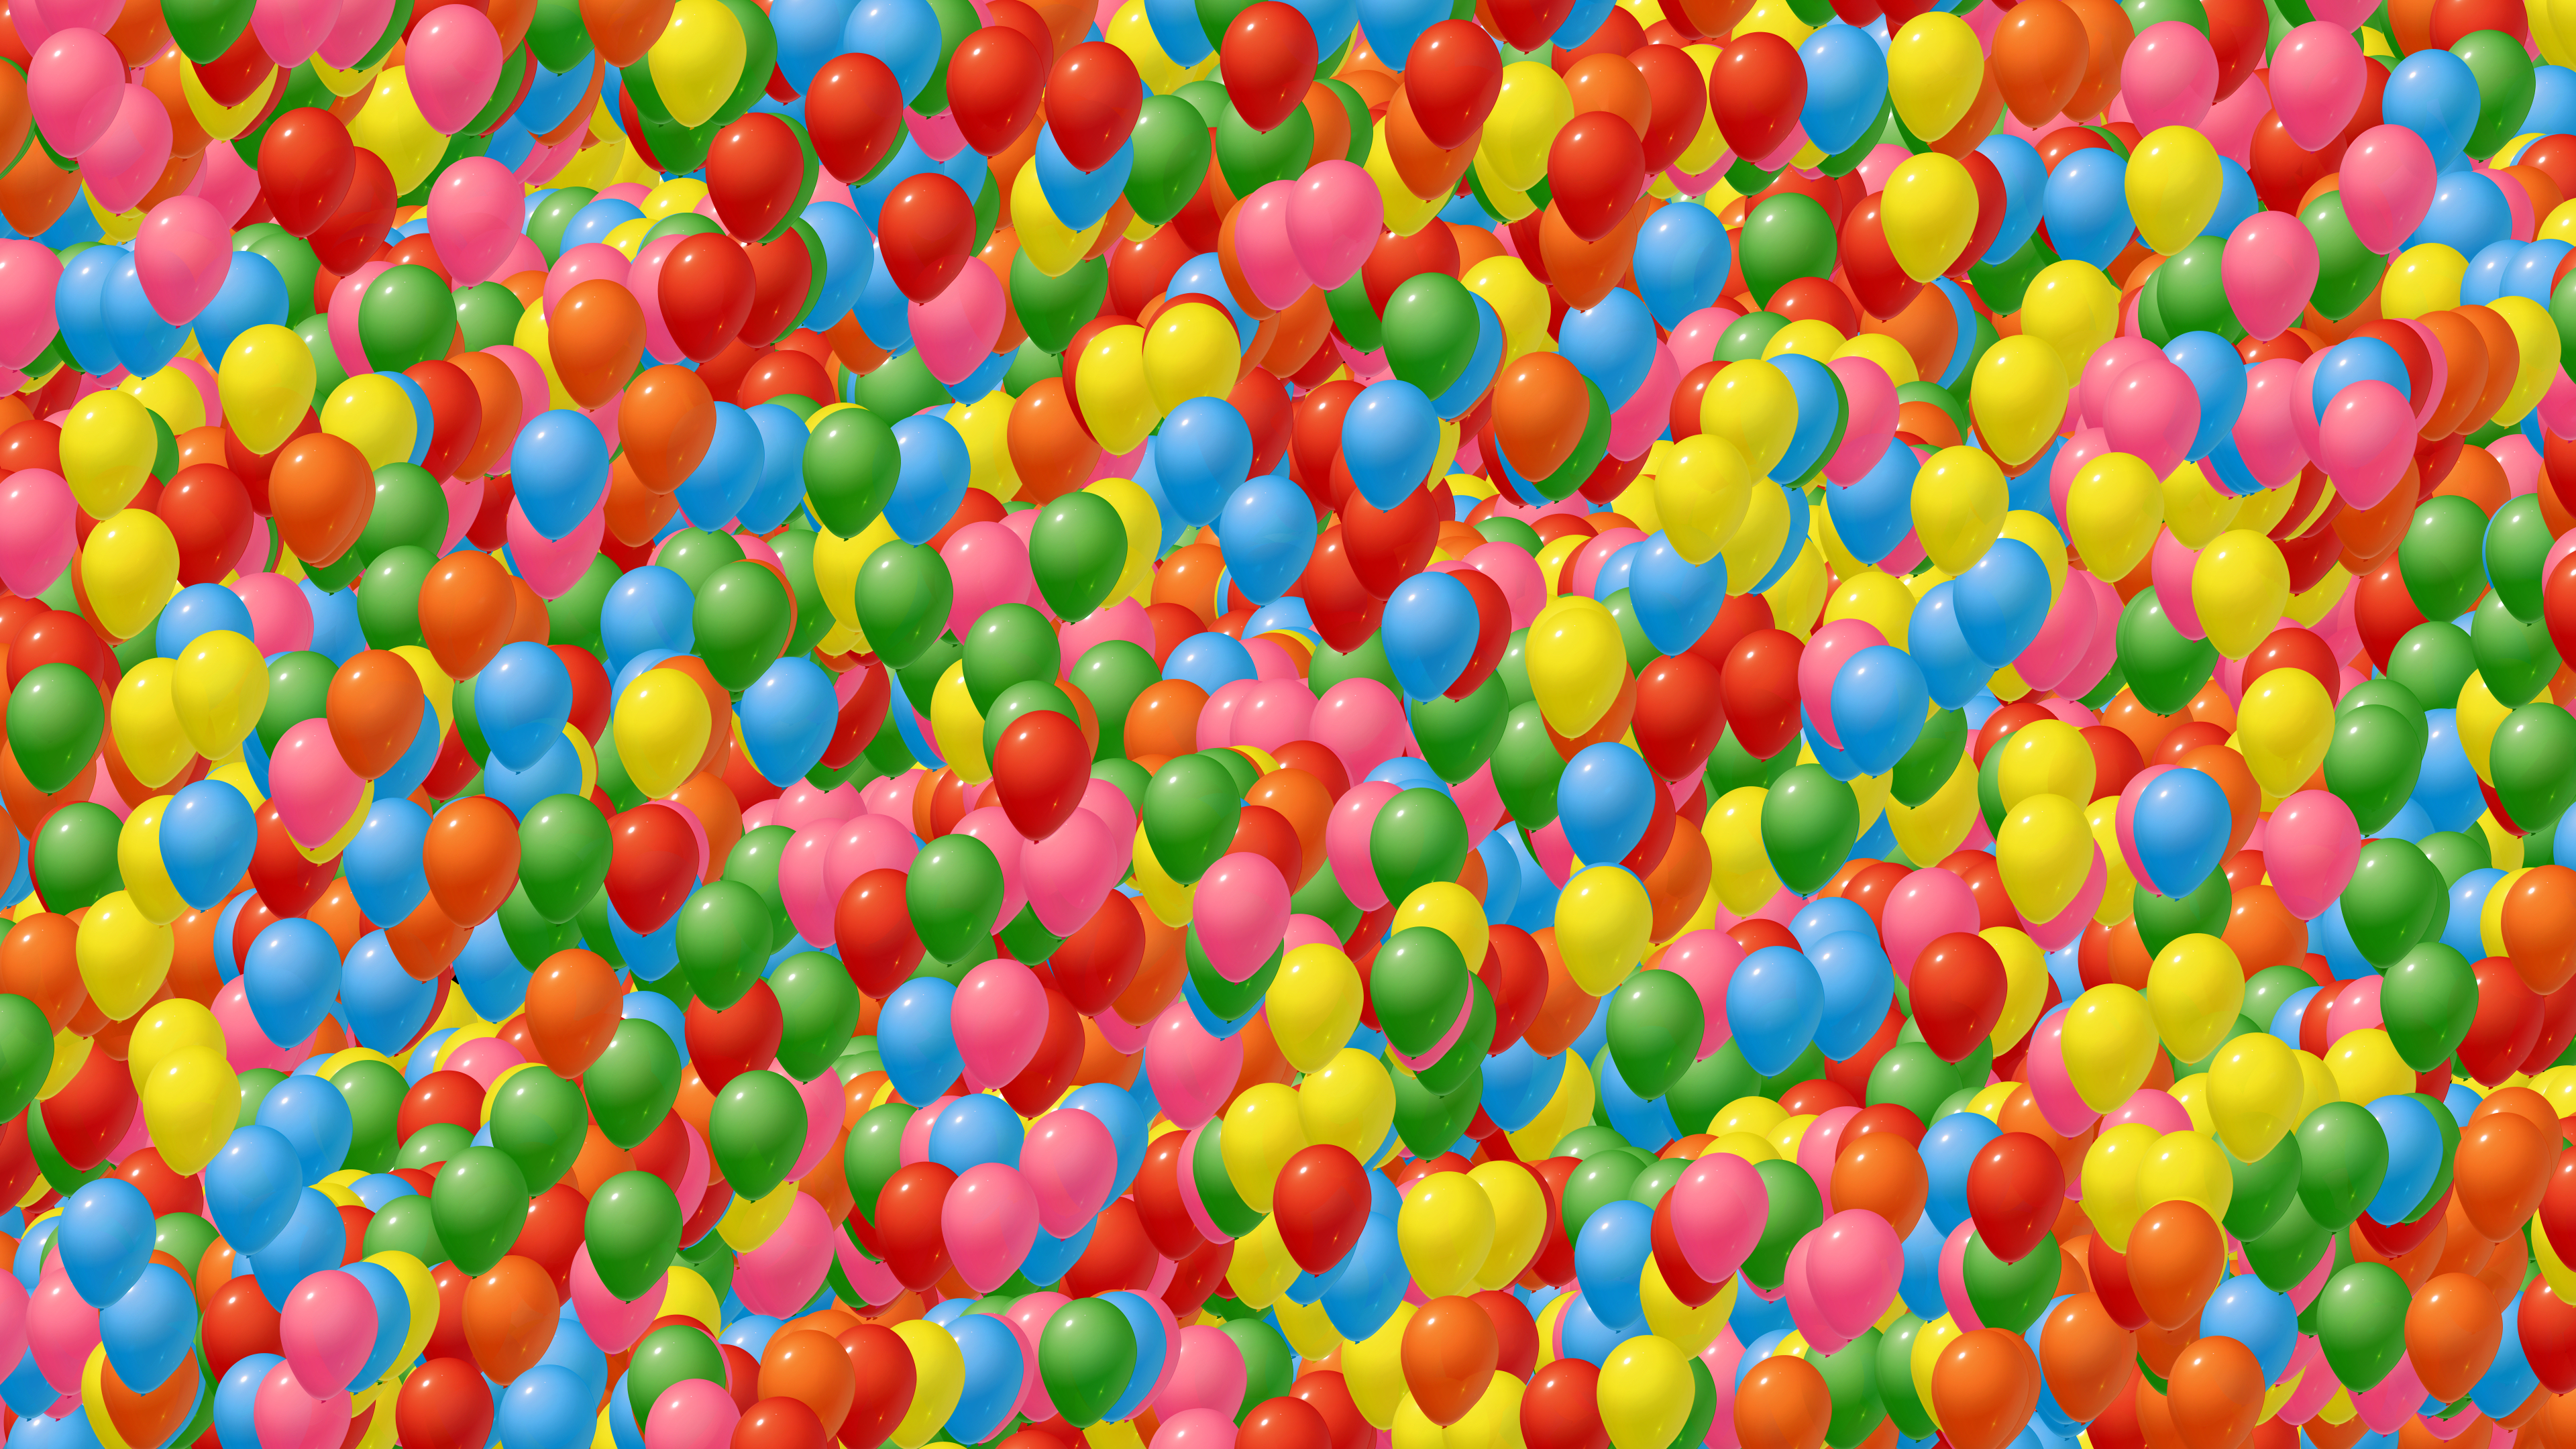 Just Balloons 4k Ultra HD Wallpaper | Background Image | 3840x2160 | ID